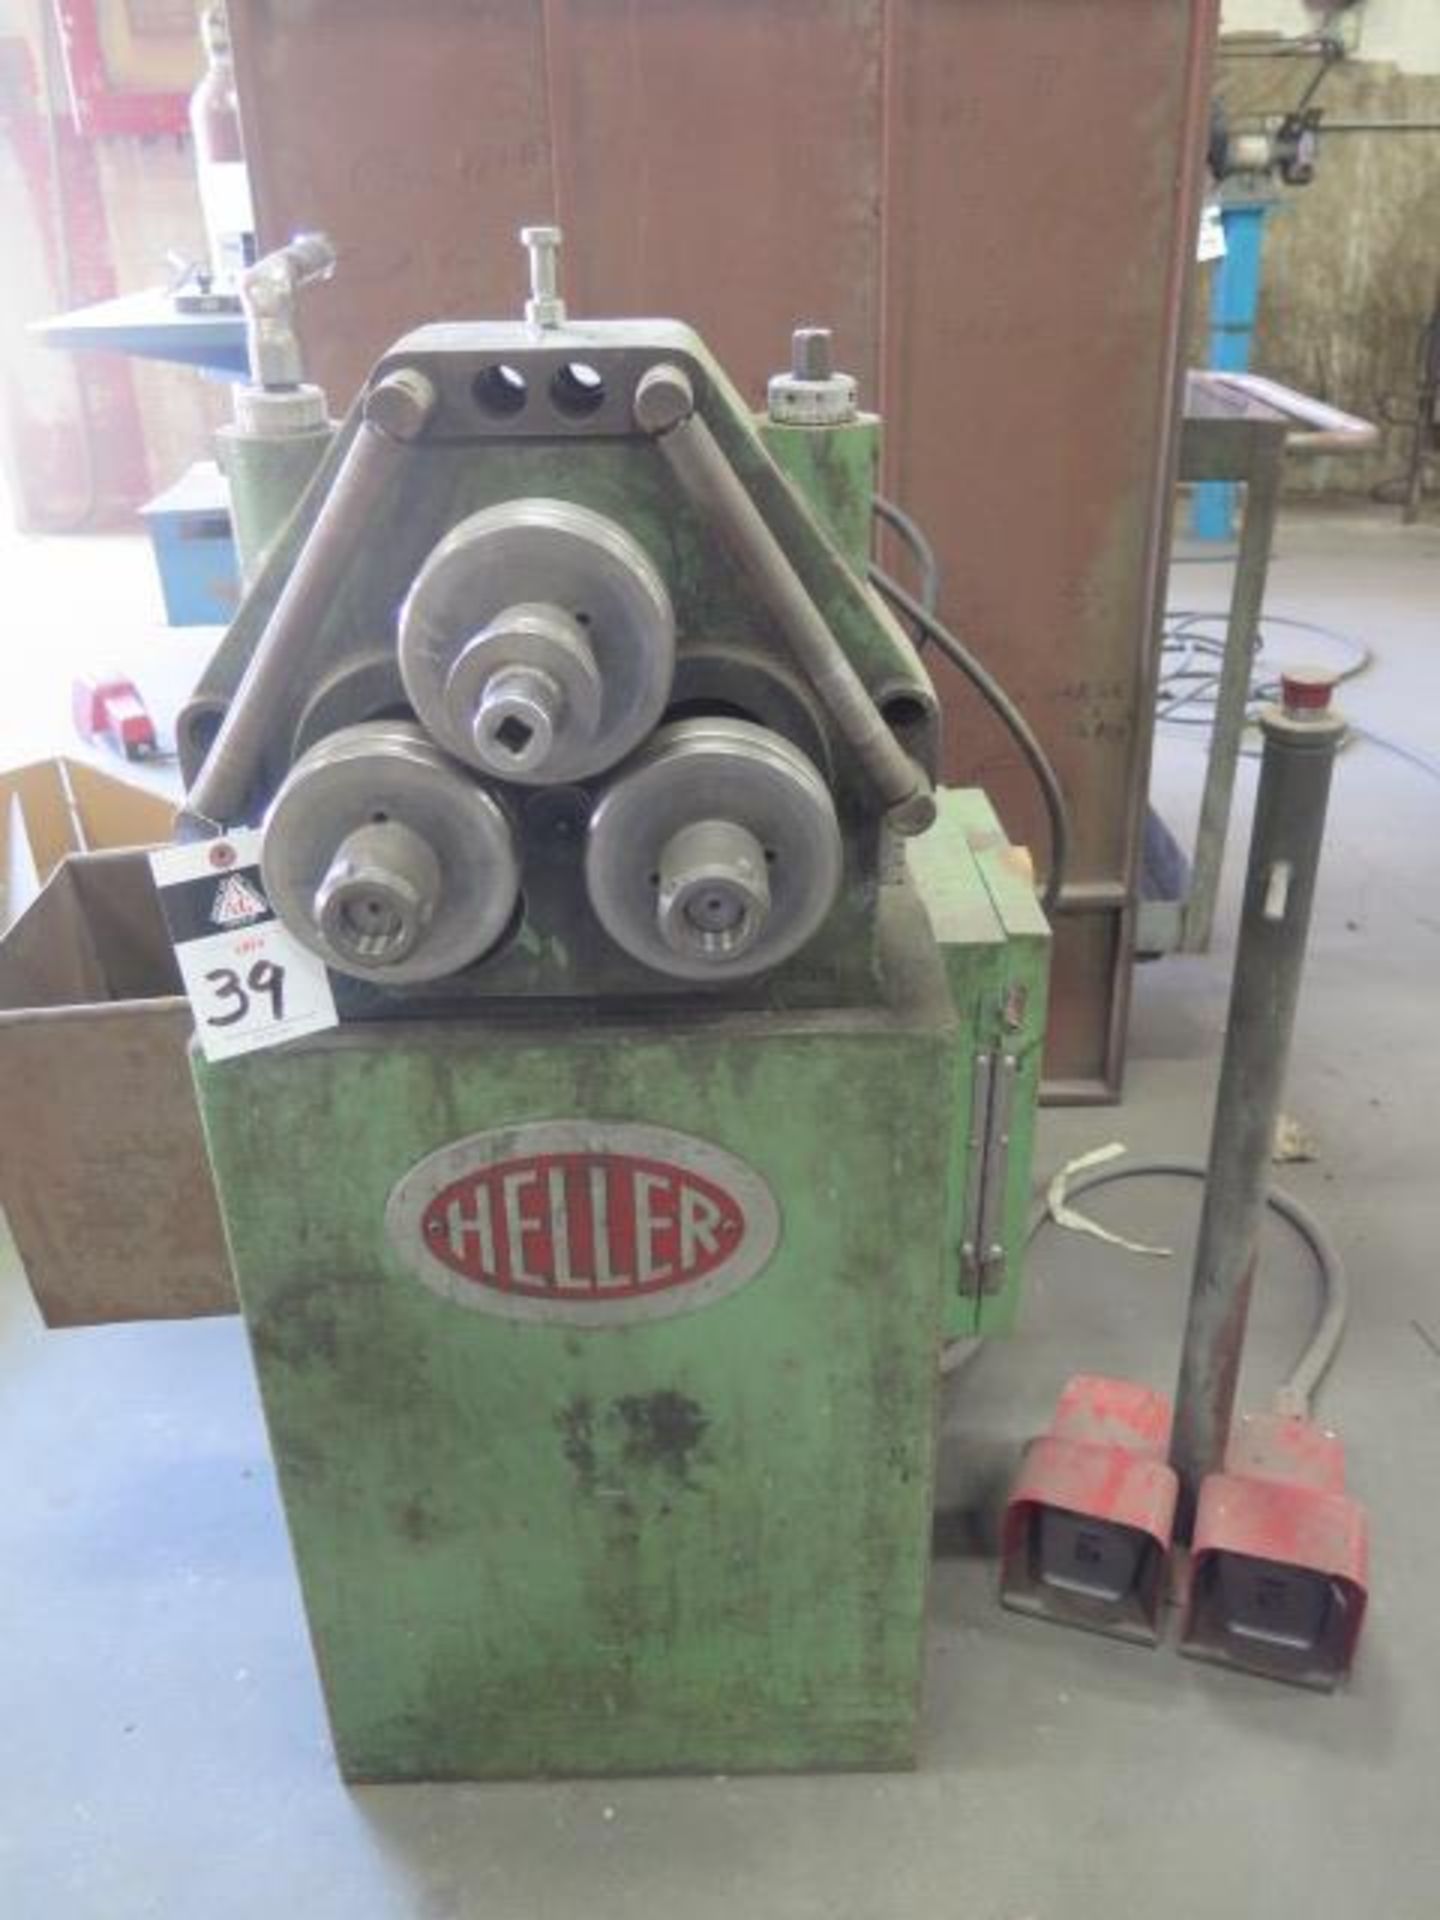 E.G. Hellers mdl. 3001PM Angle Roll s/n 31703PM w/ 5 ½” Rolls, Roll Tooling (SOLD AS-IS - NO